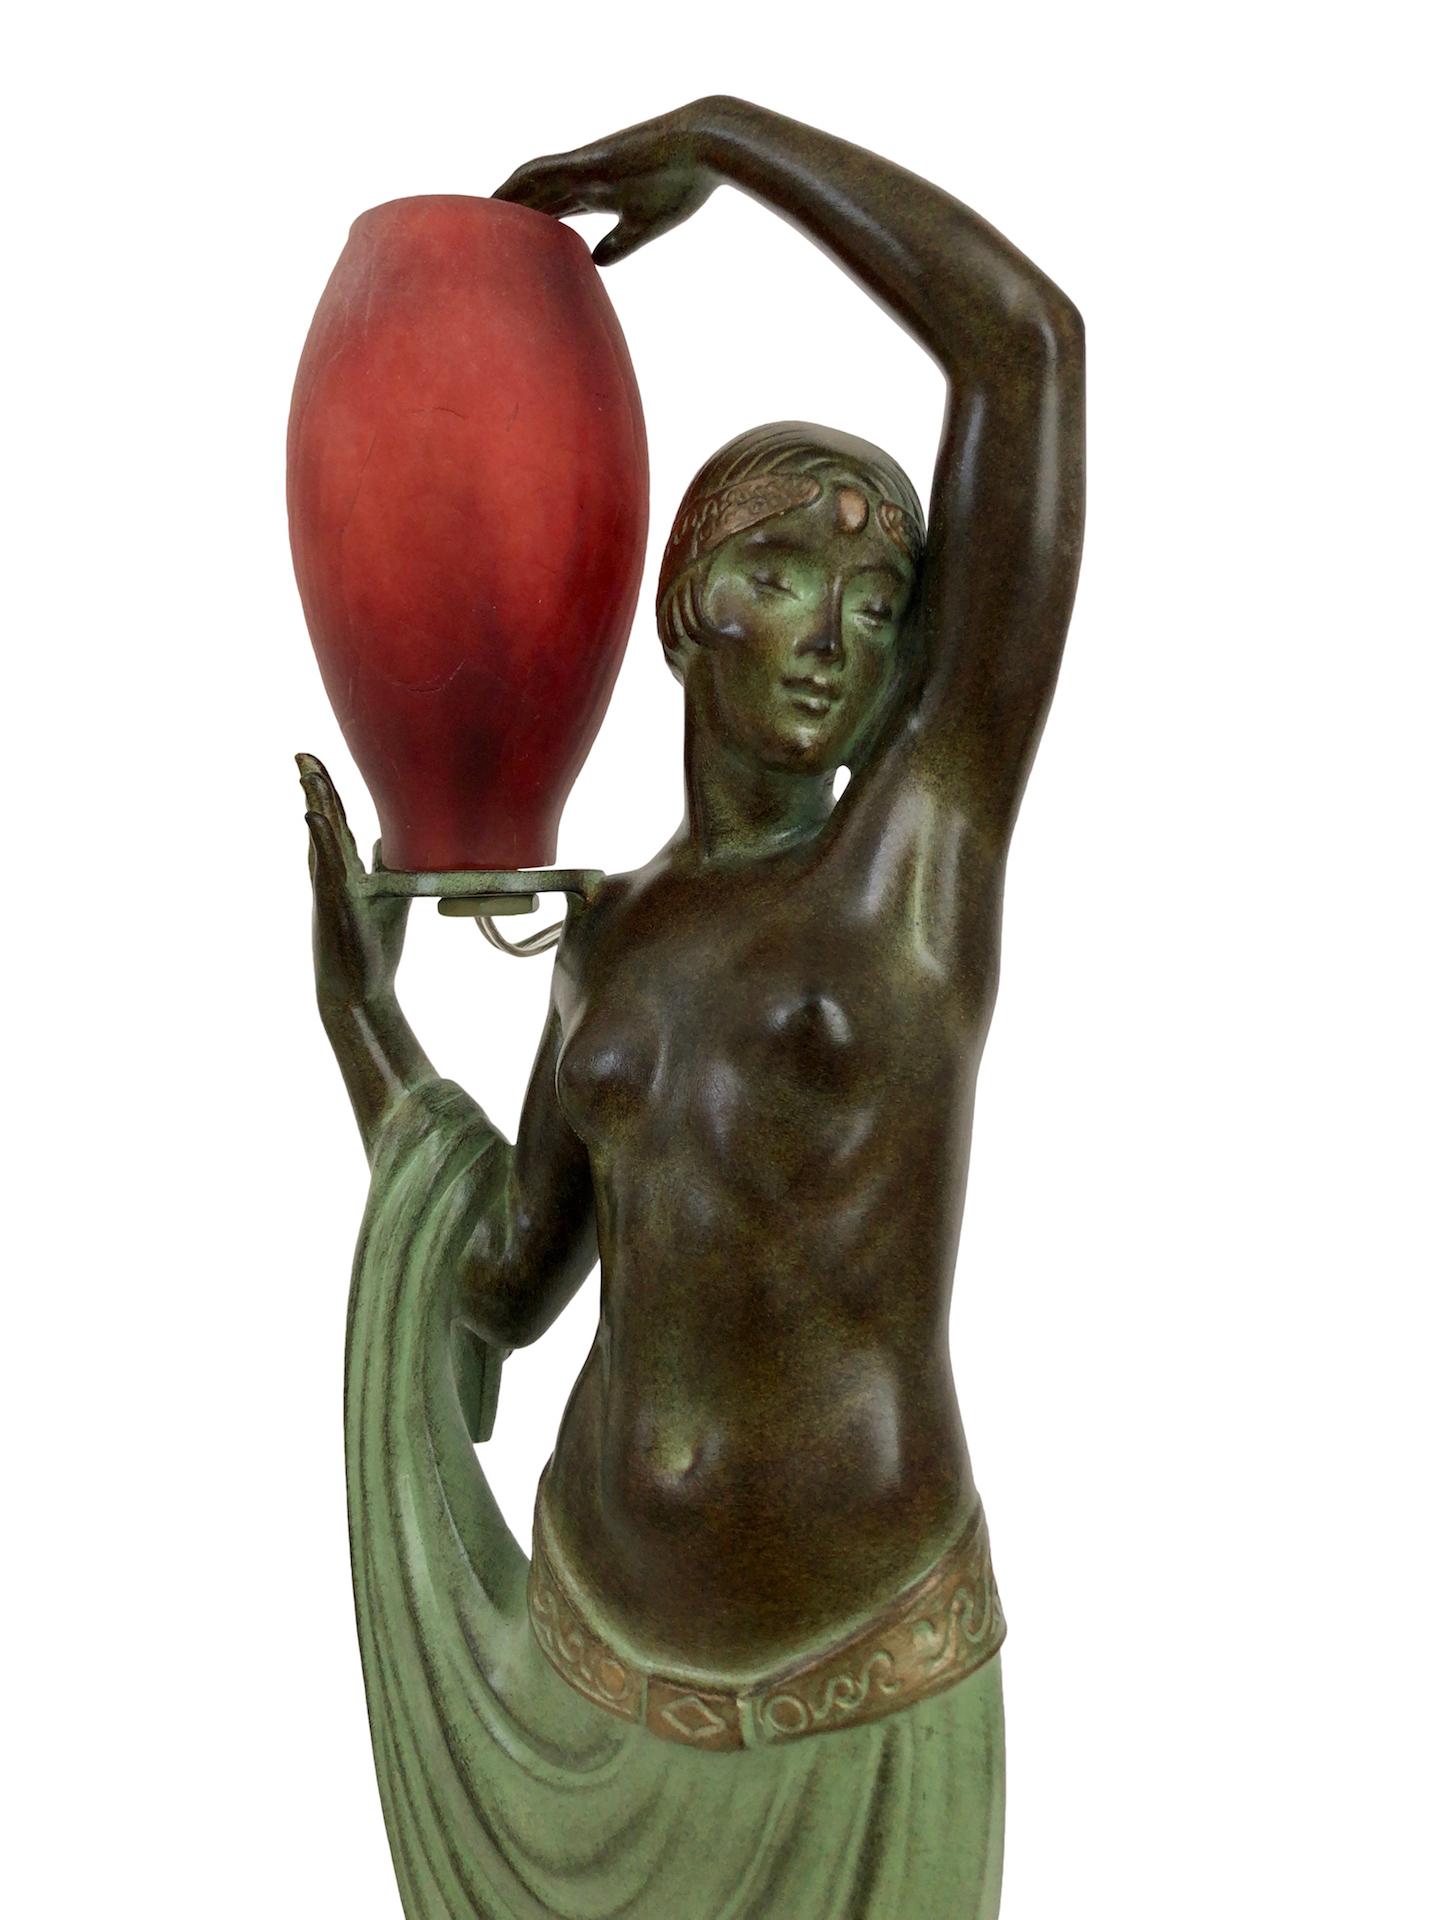 Lighted Art Deco Style Sculpture Lamp Odalisque by Fayral and Max Le Verrier  For Sale 2